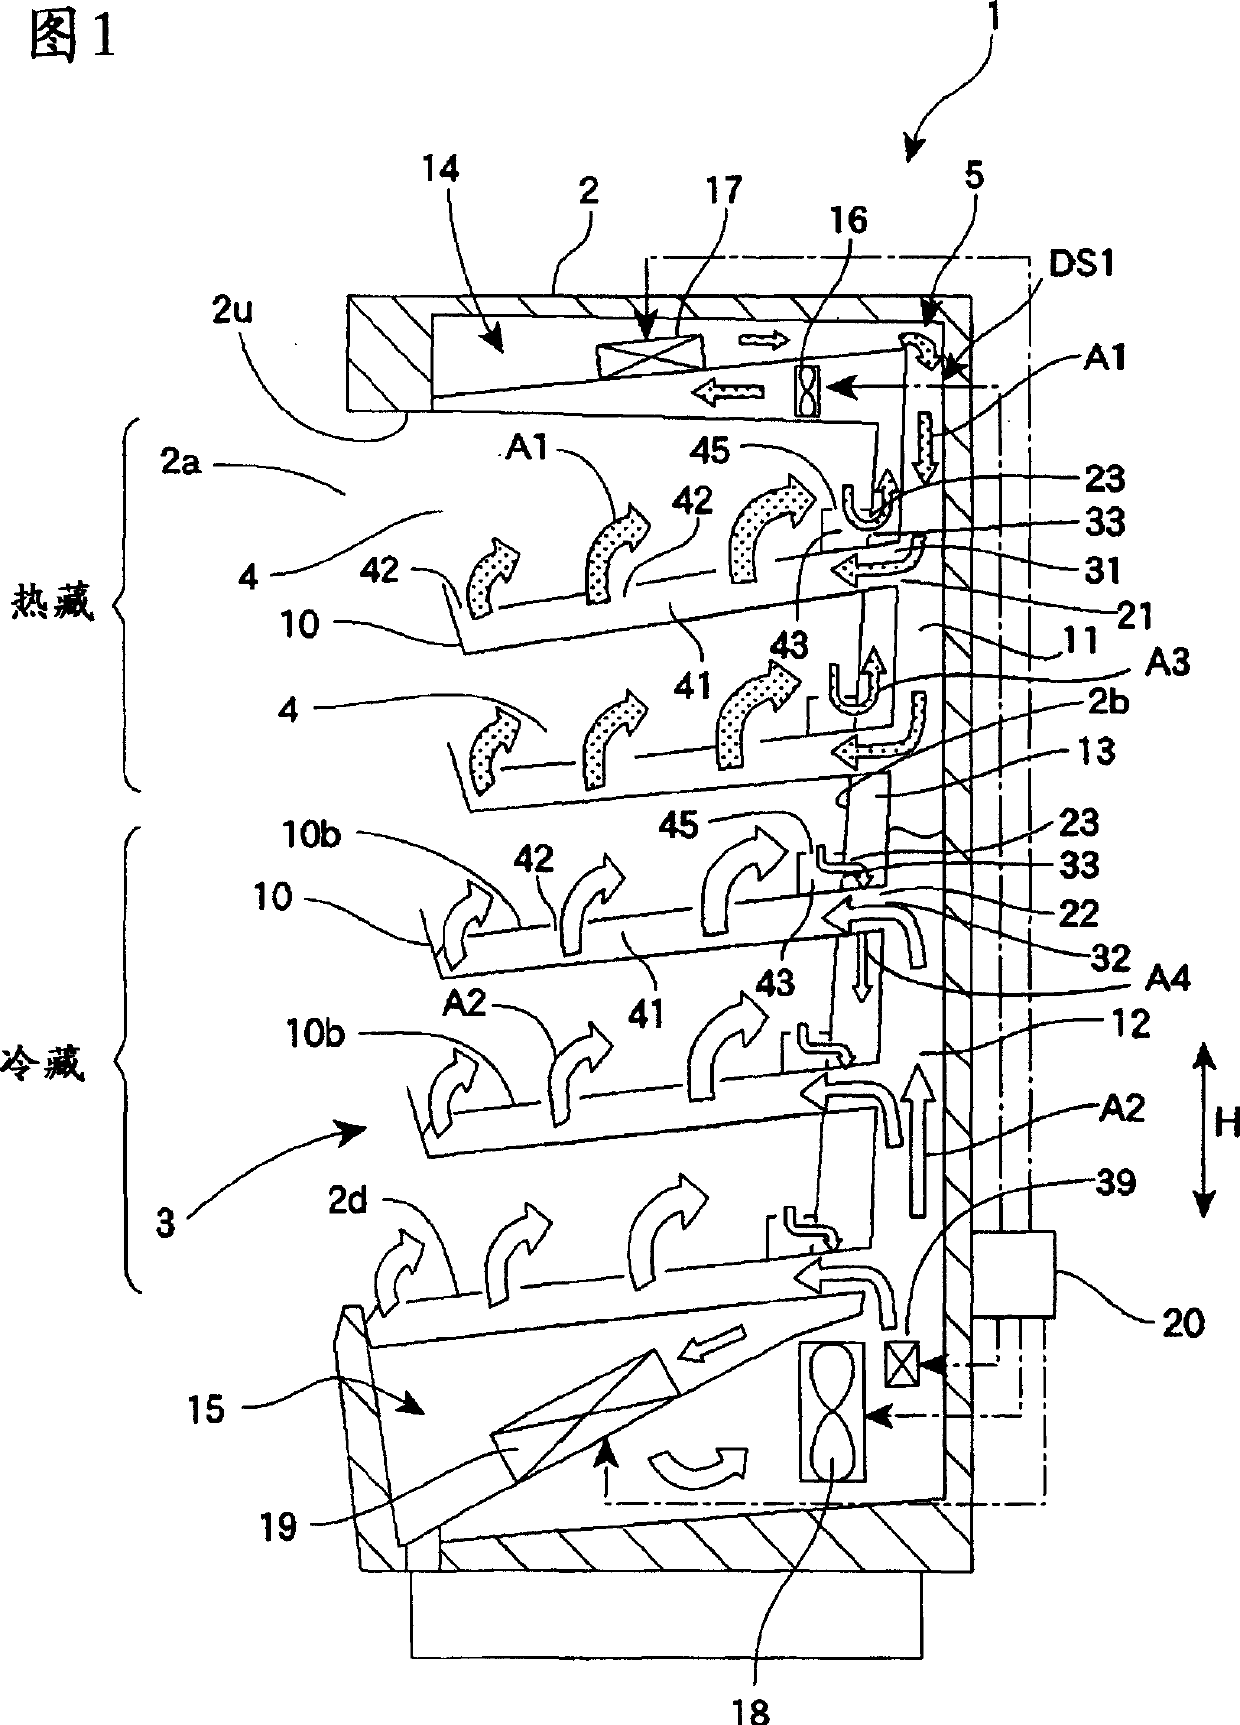 Duct system and receiving device